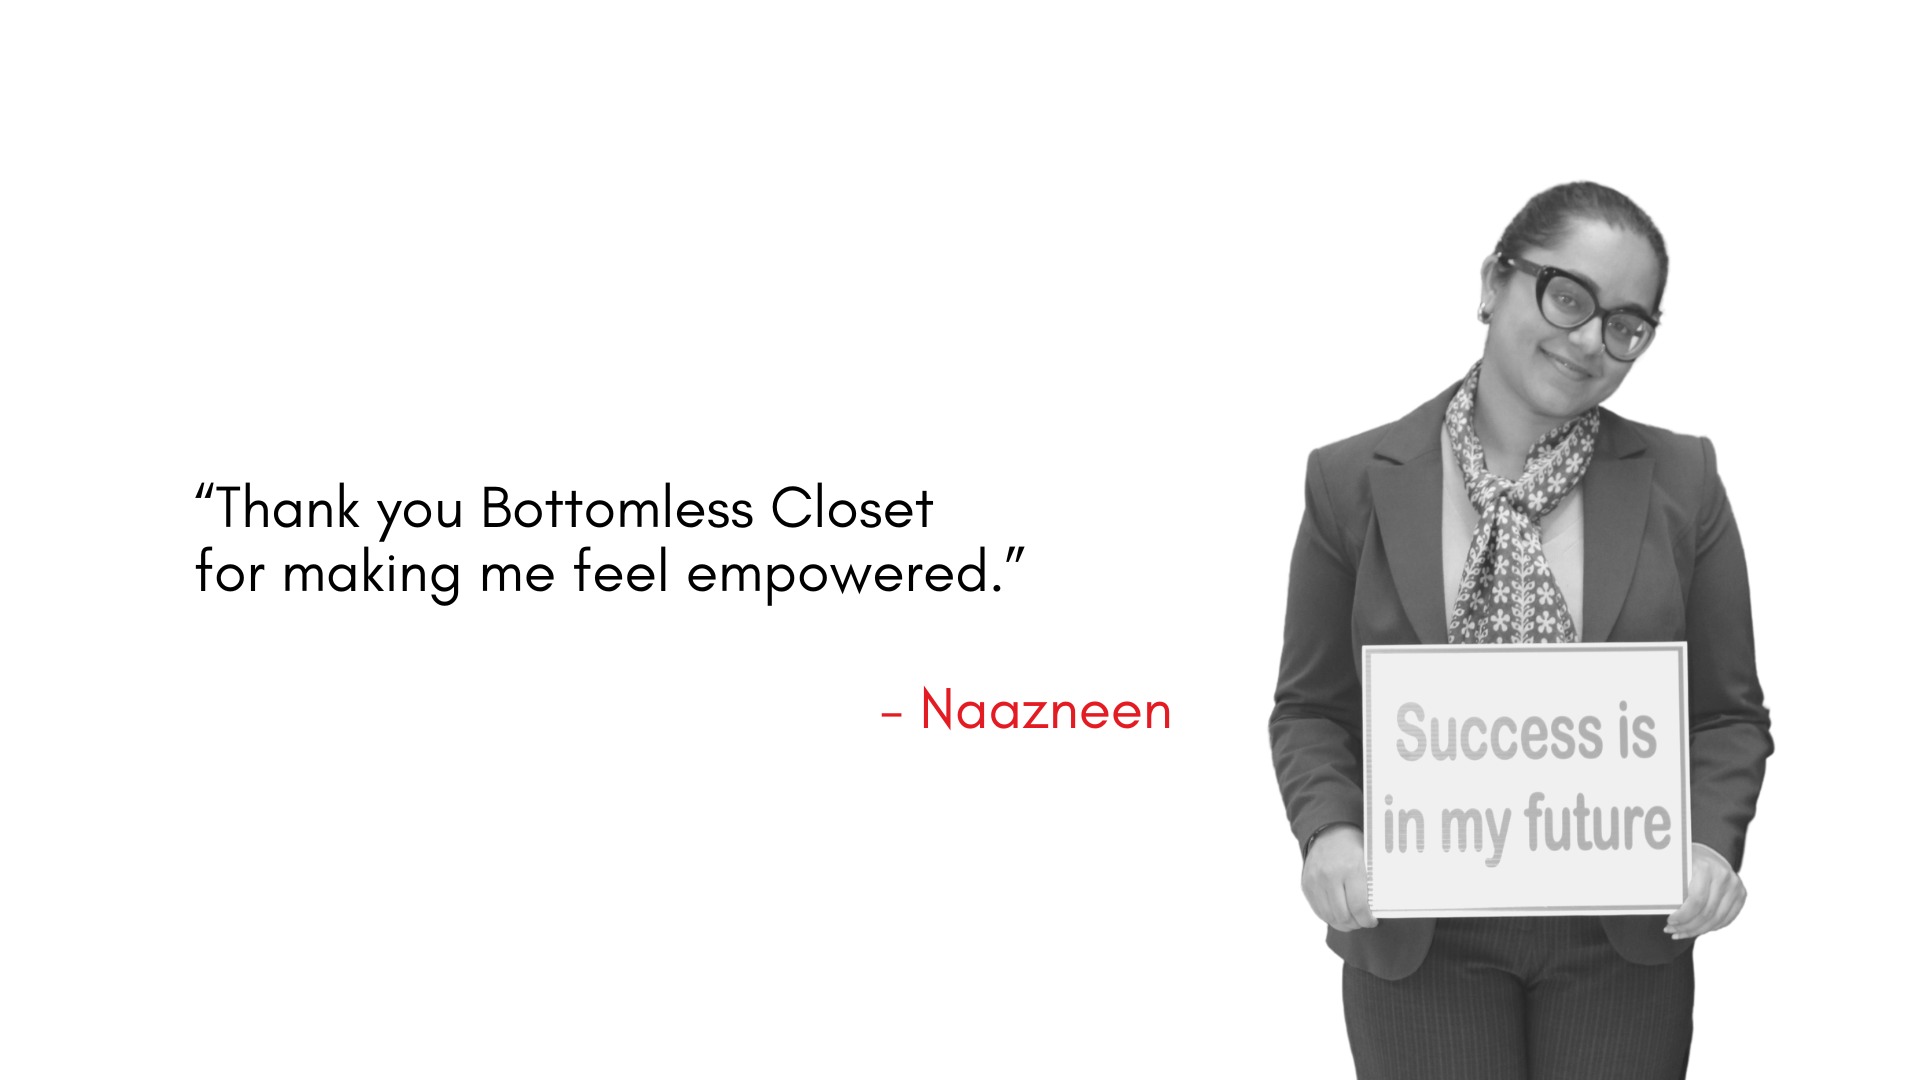 “Thank you Bottomless Closet for making me feel empowered.” 